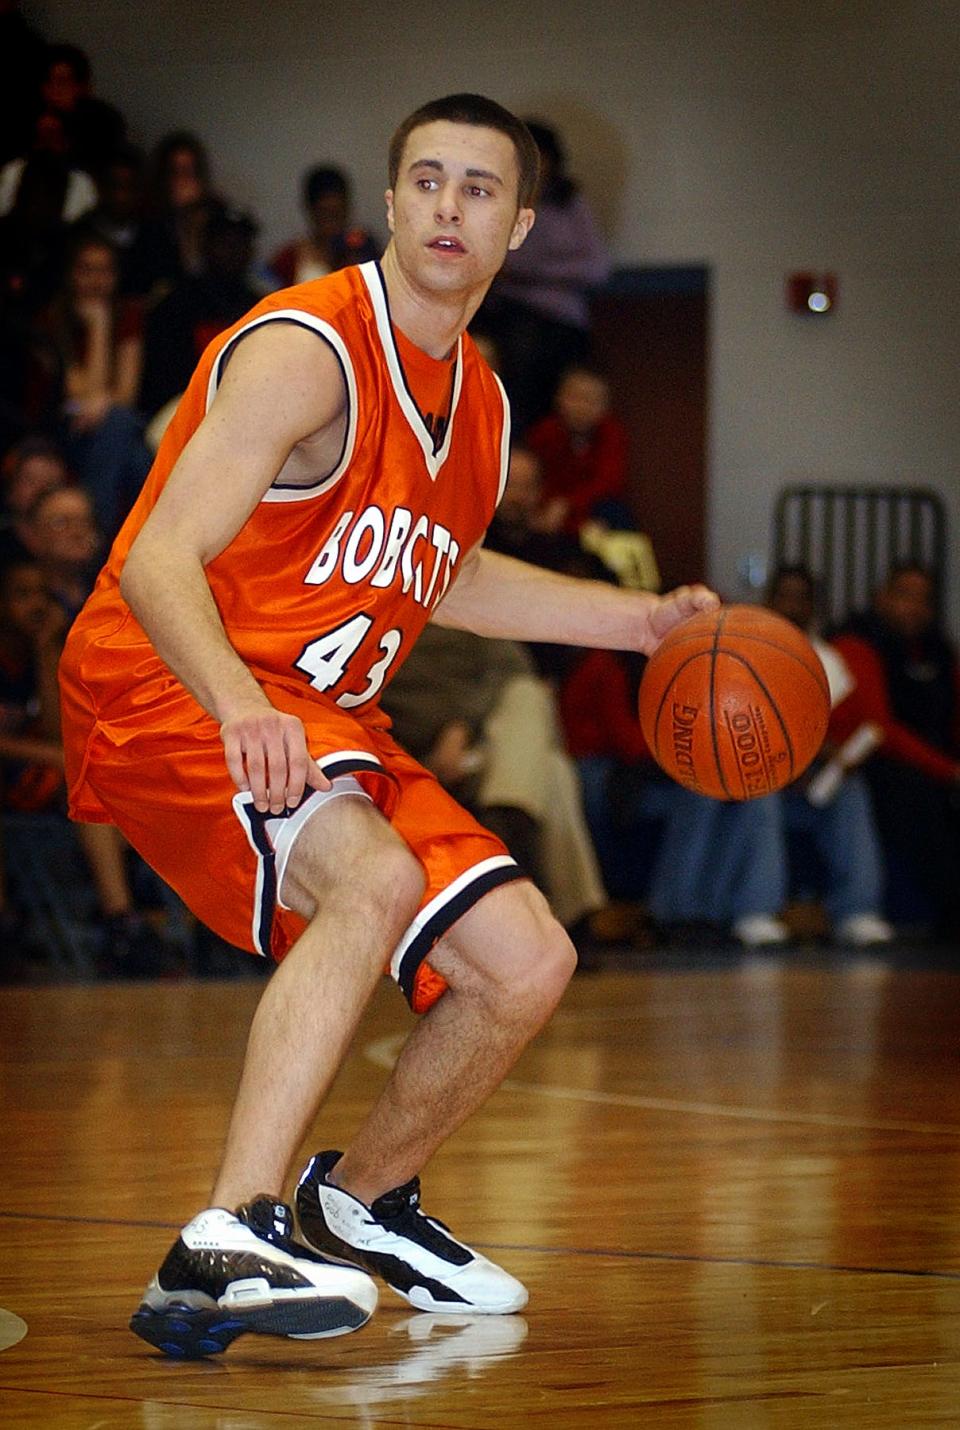 Northeastern's Levi Winters dribbles down the floor during his playing career on the Bobcats' basketball team.